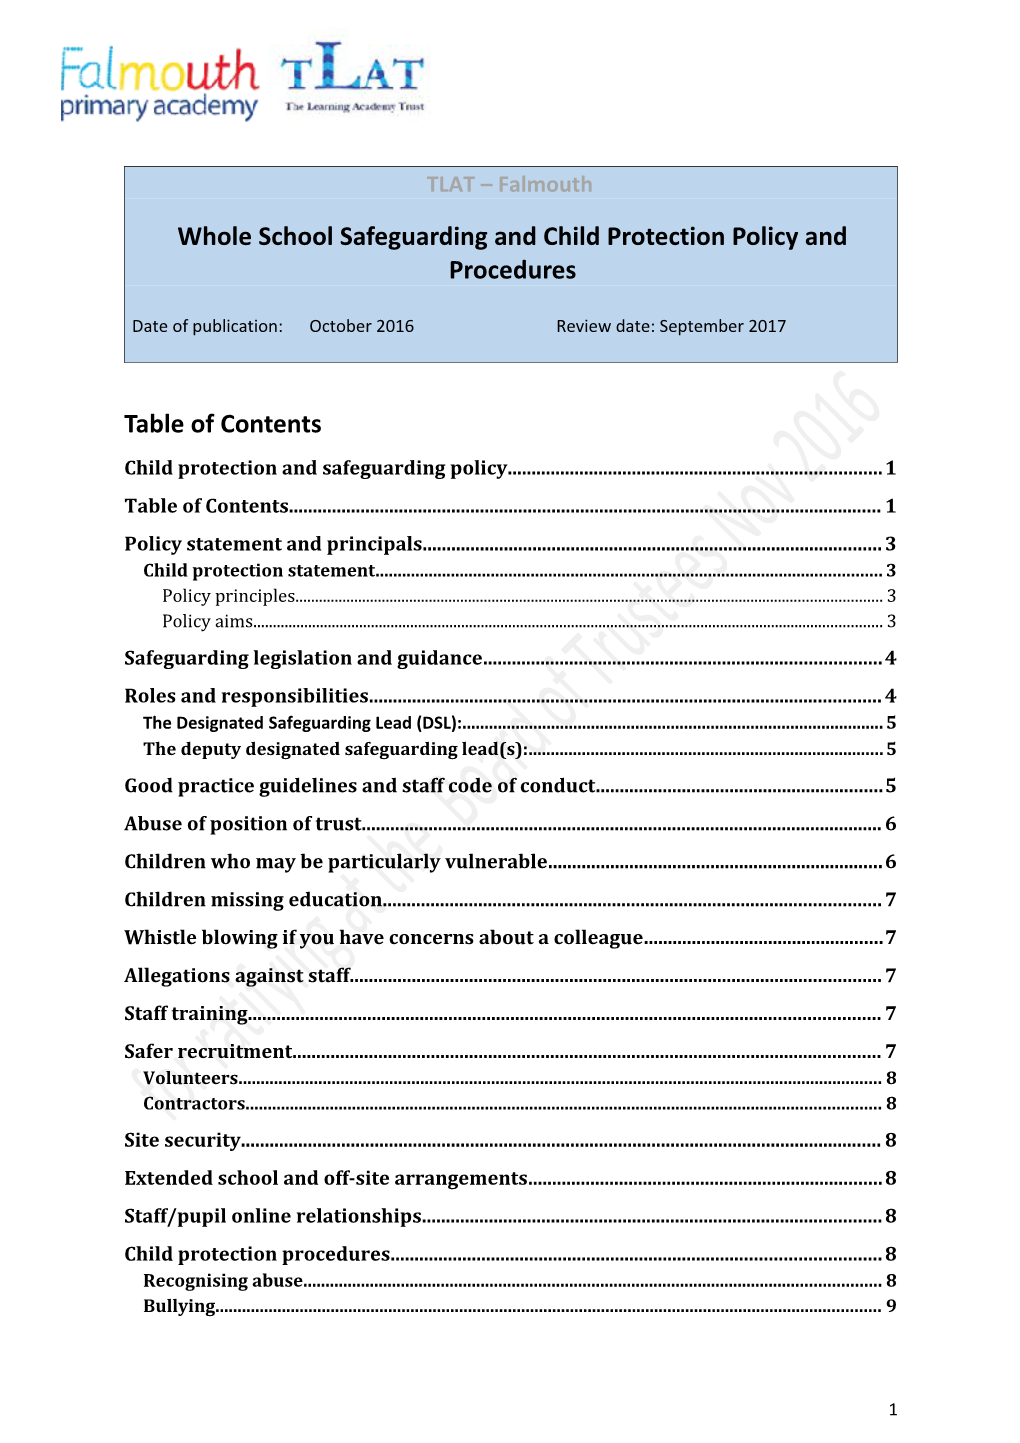 Whole School Safeguarding and Child Protection Policy and Procedures